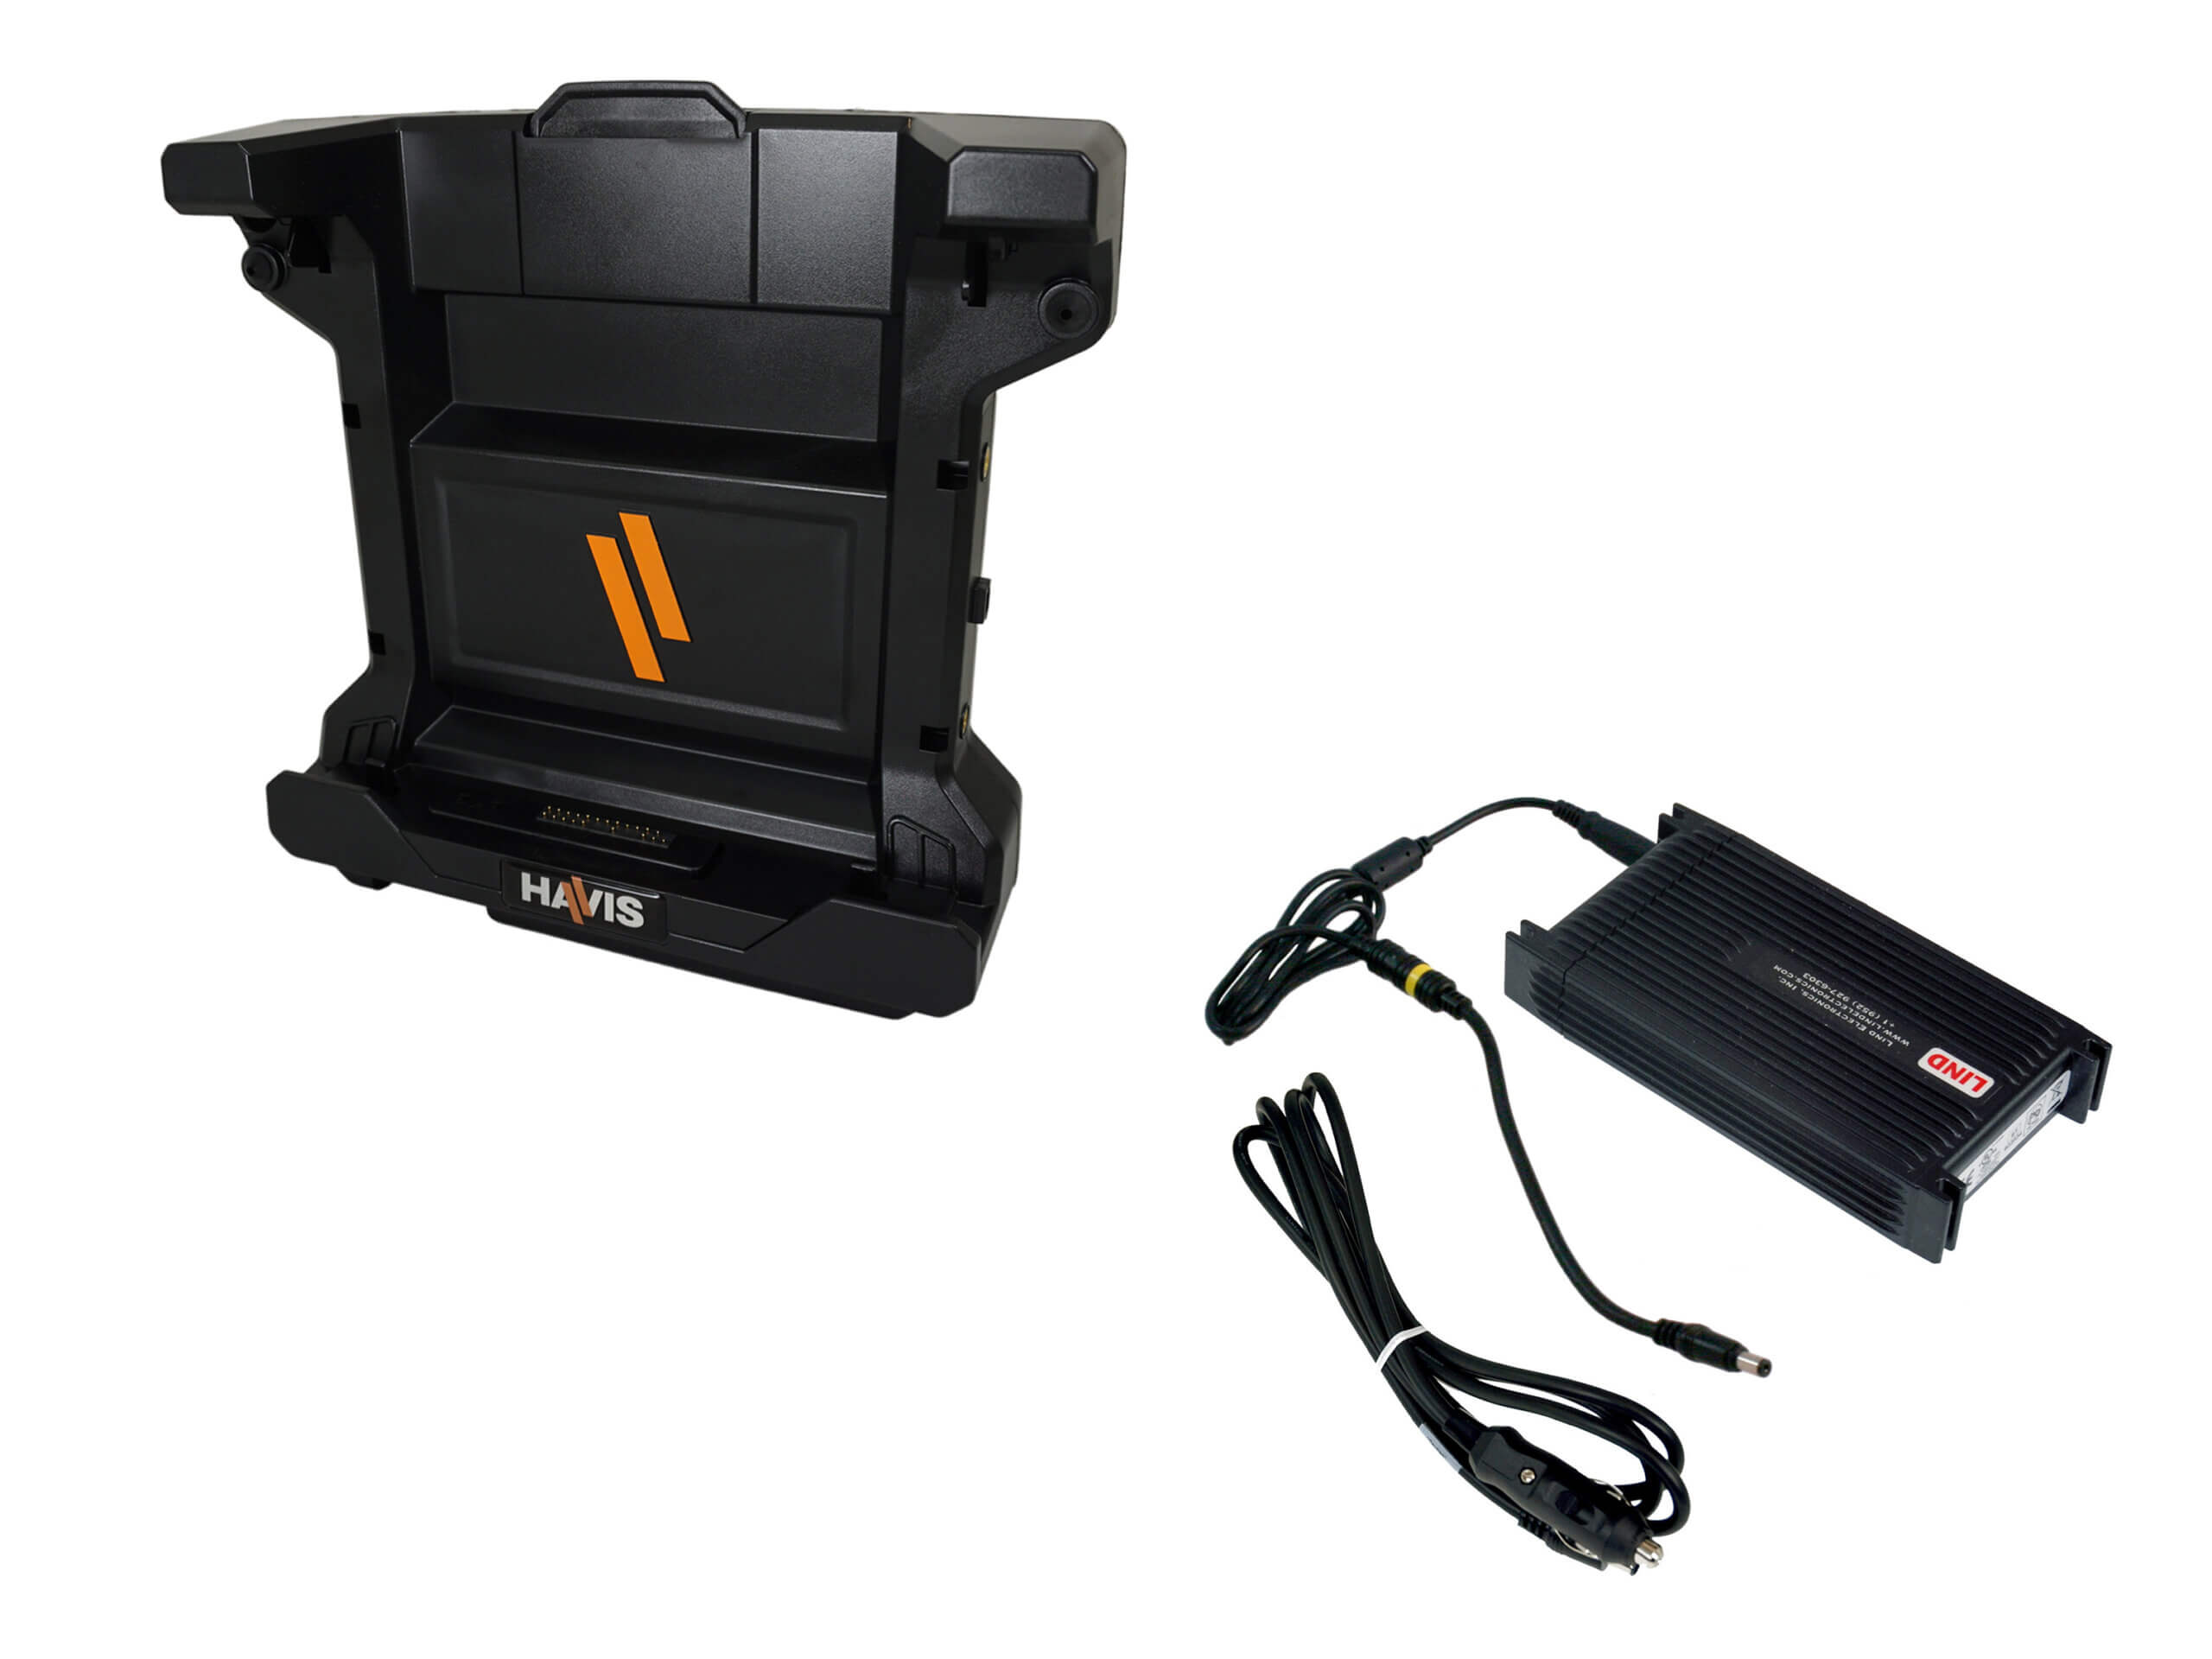 Docking Station with Standard Electronics and External Power Supply for Dell Latitude Rugged 12″ Tablets (7220, 7212)